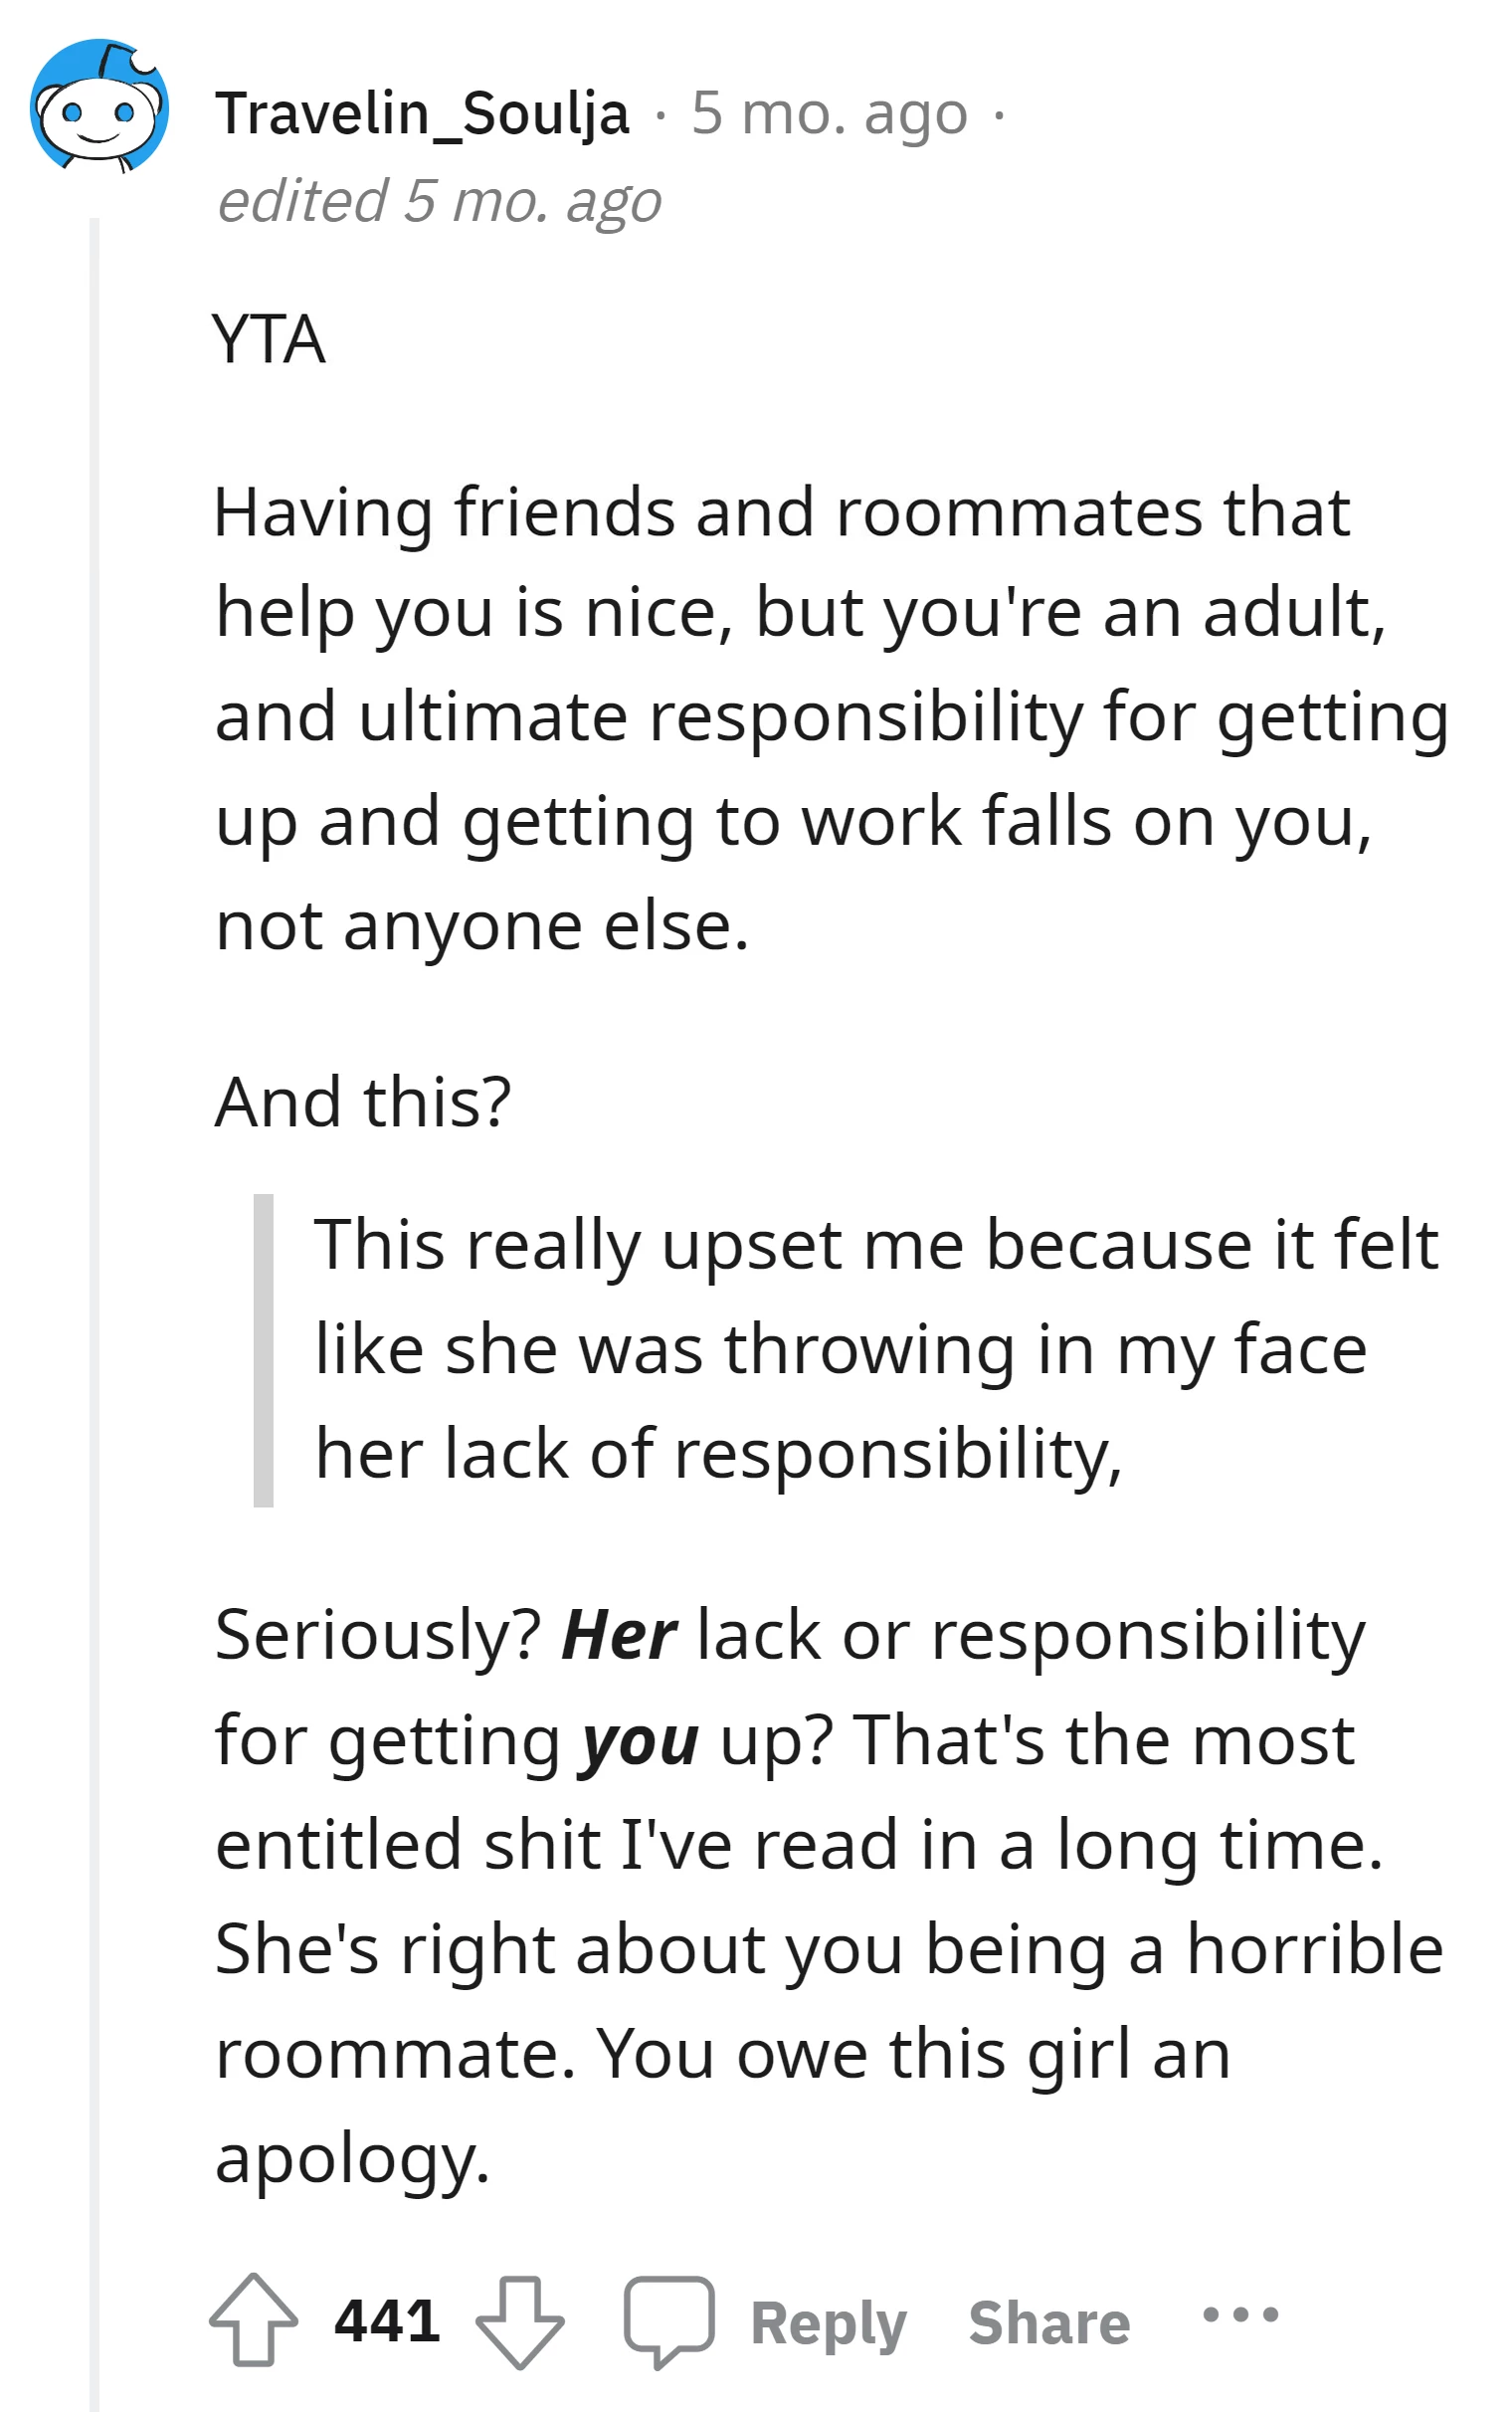 The responsibility of waking up and getting to work lies with the OP, not her roommate